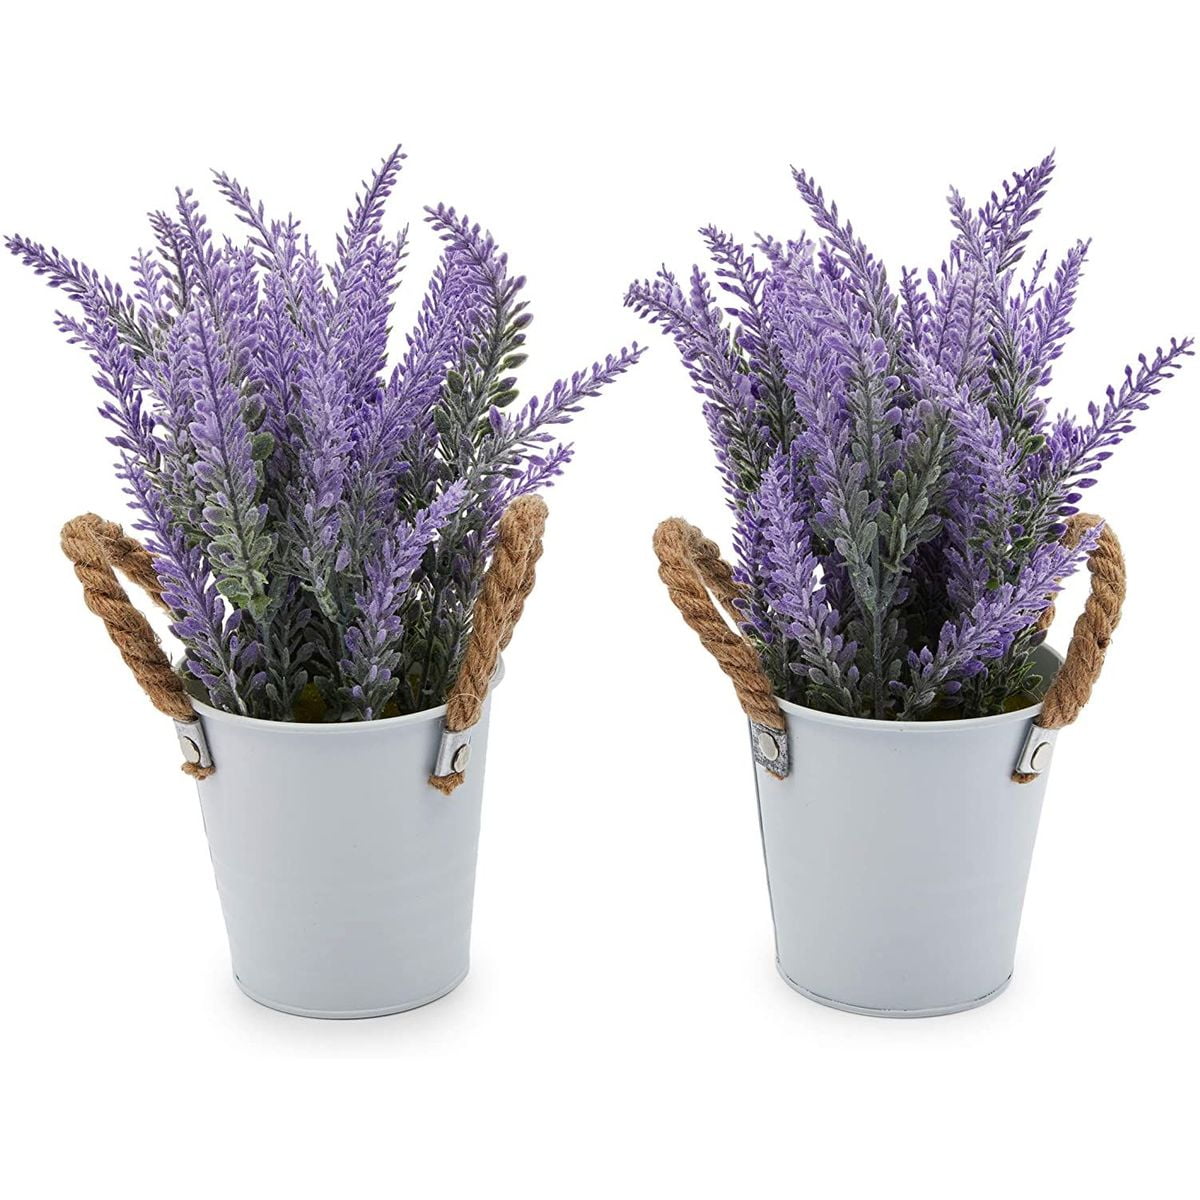 2 New 12in Potted White Lavender Bushes Artificial Silk Flowers Plants OFFER! 